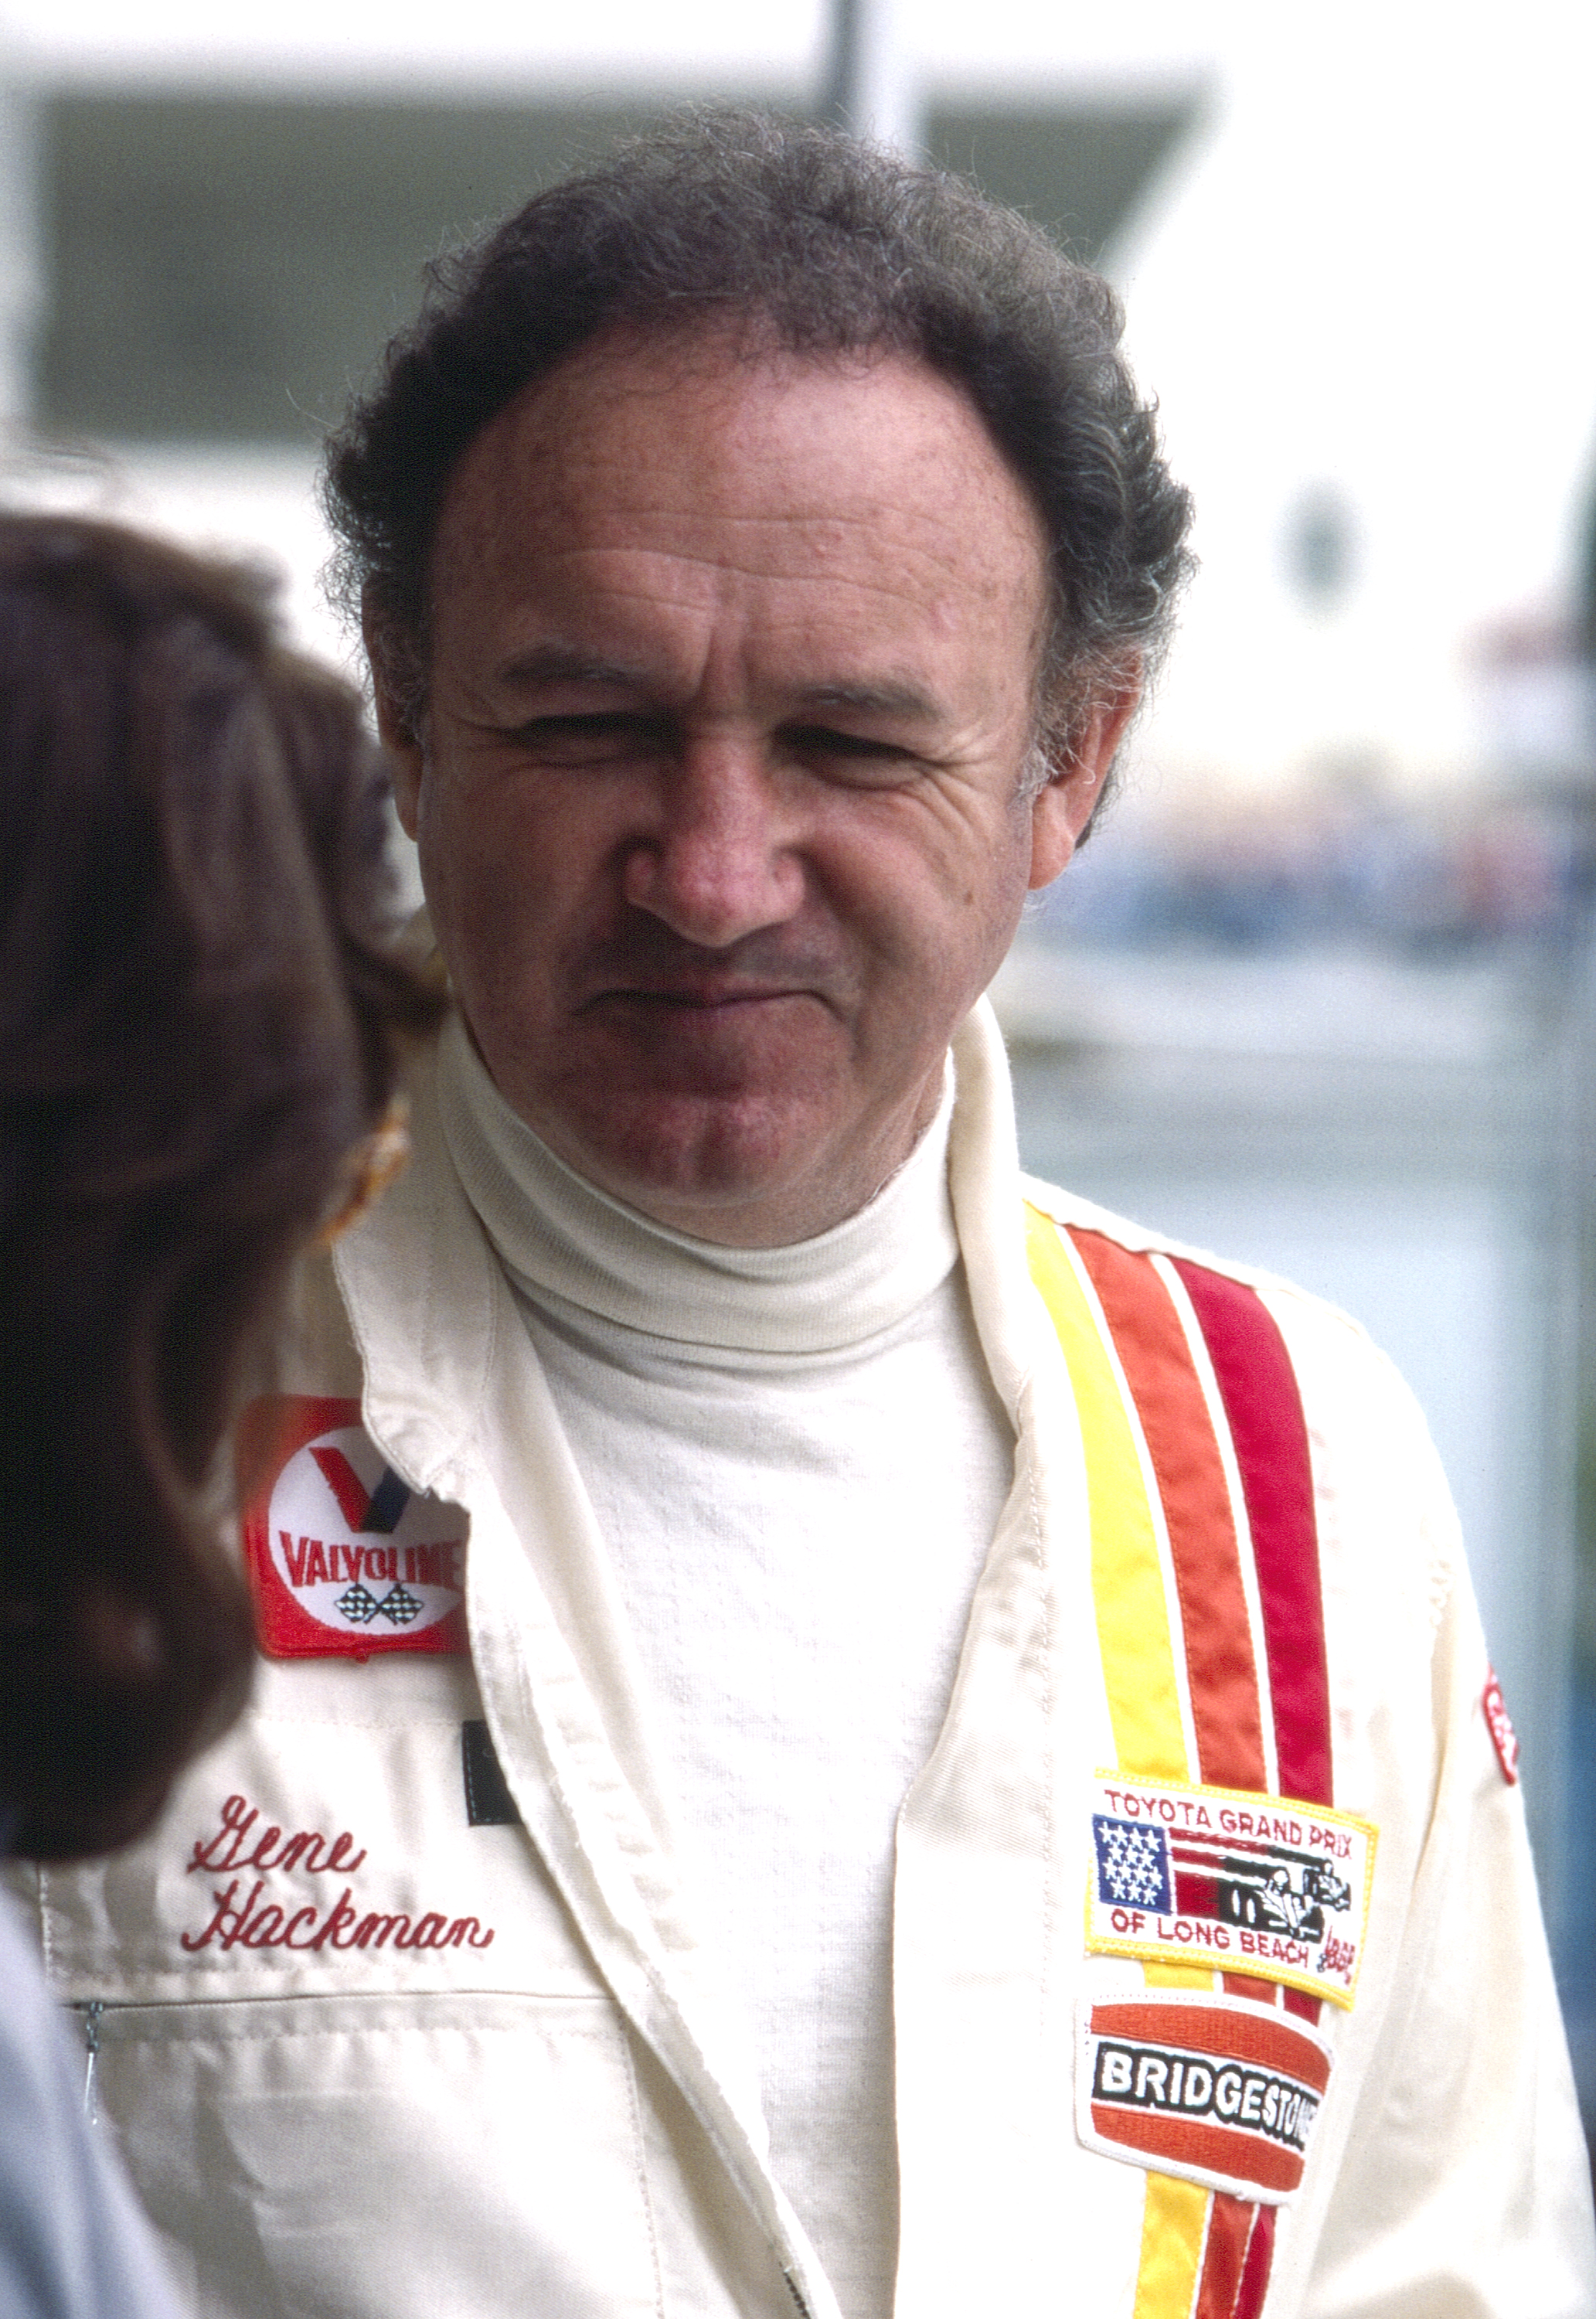 Gene Hackman at the Toyota Celebrity/Long Beach Grand Prix Race on March 14, 1981 in Long Beach, California | Source: Getty Images